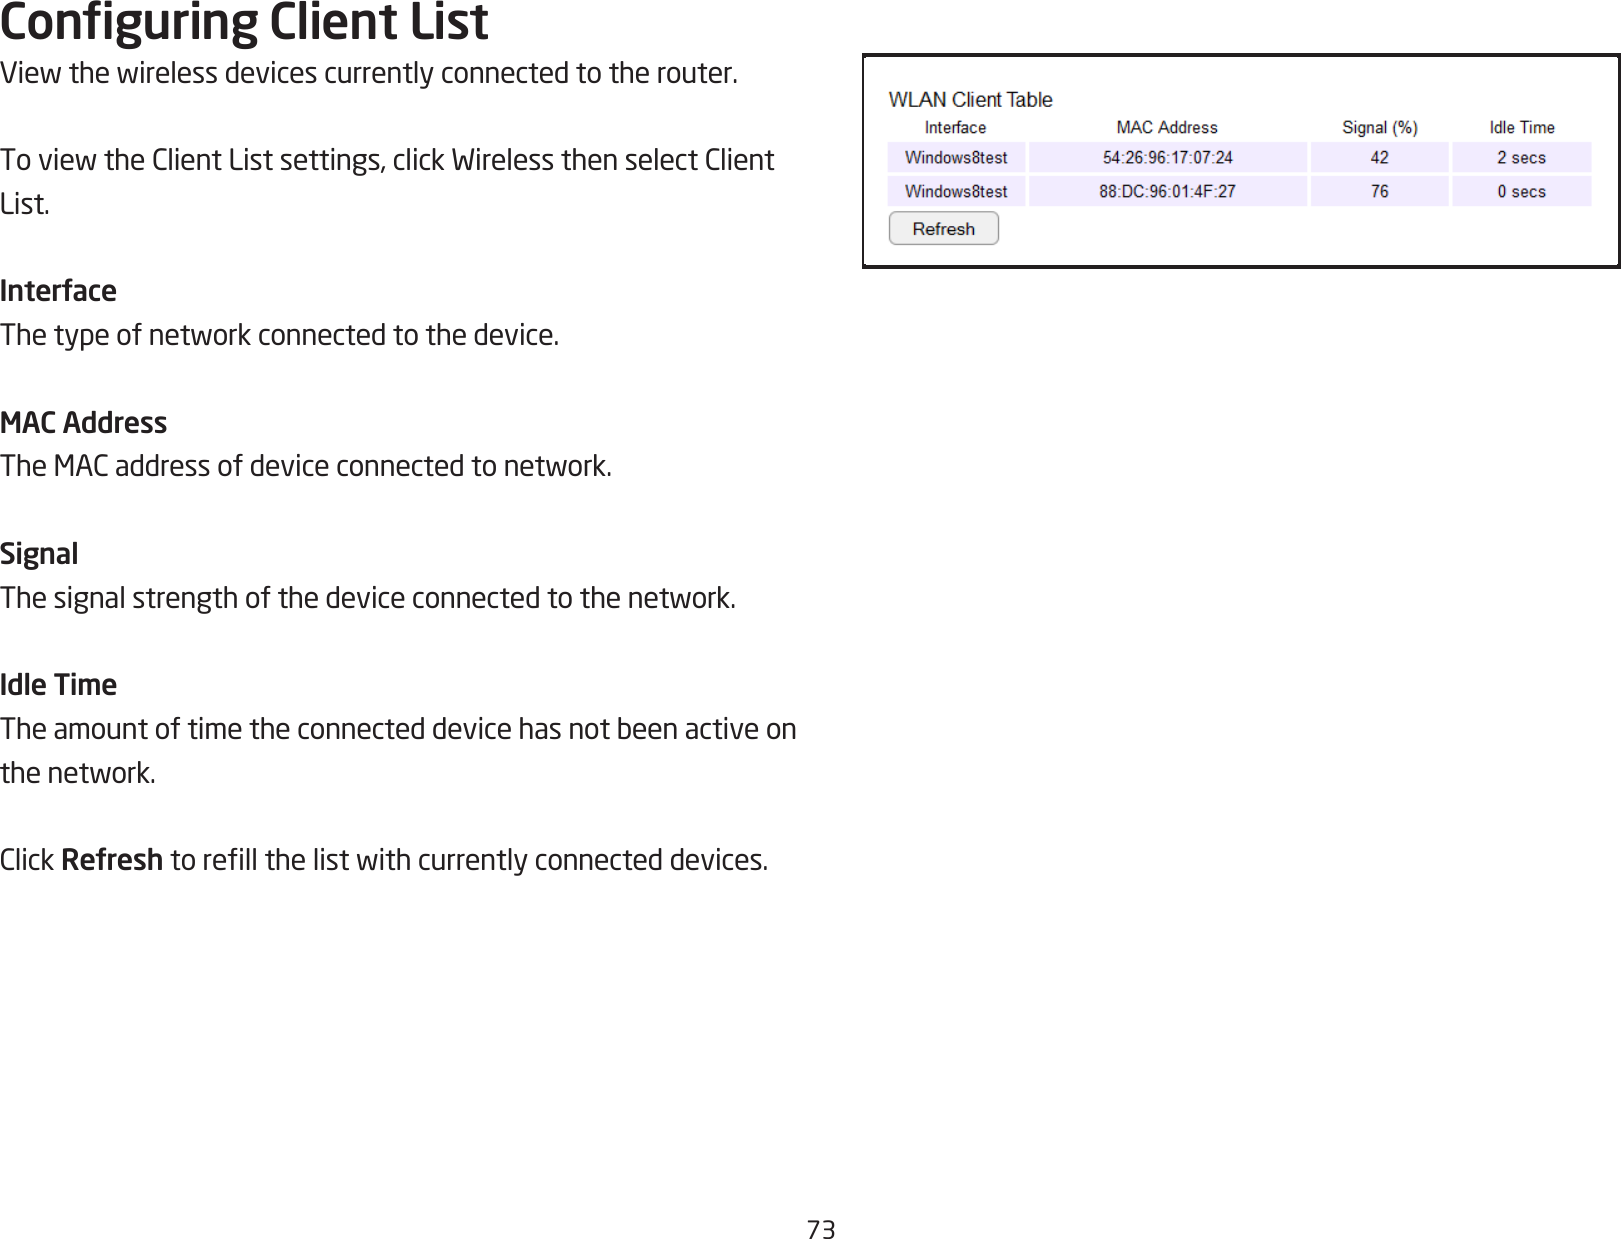 73Conguring Client ListViewthewirelessdevicescurrentlyconnectedtotherouter.ToviewtheClientListsettings,clickWirelessthenselectClientList.InterfaceThetypeofnetworkconnectedtothedevice.MAC AddressTheMACaddressofdeviceconnectedtonetwork.SignalThesignalstrengthofthedeviceconnectedtothenetwork.Idle TimeTheamountoftimetheconnecteddevicehasnotbeenactiveonthenetwork.ClickRefreshtorellthelistwithcurrentlyconnecteddevices.